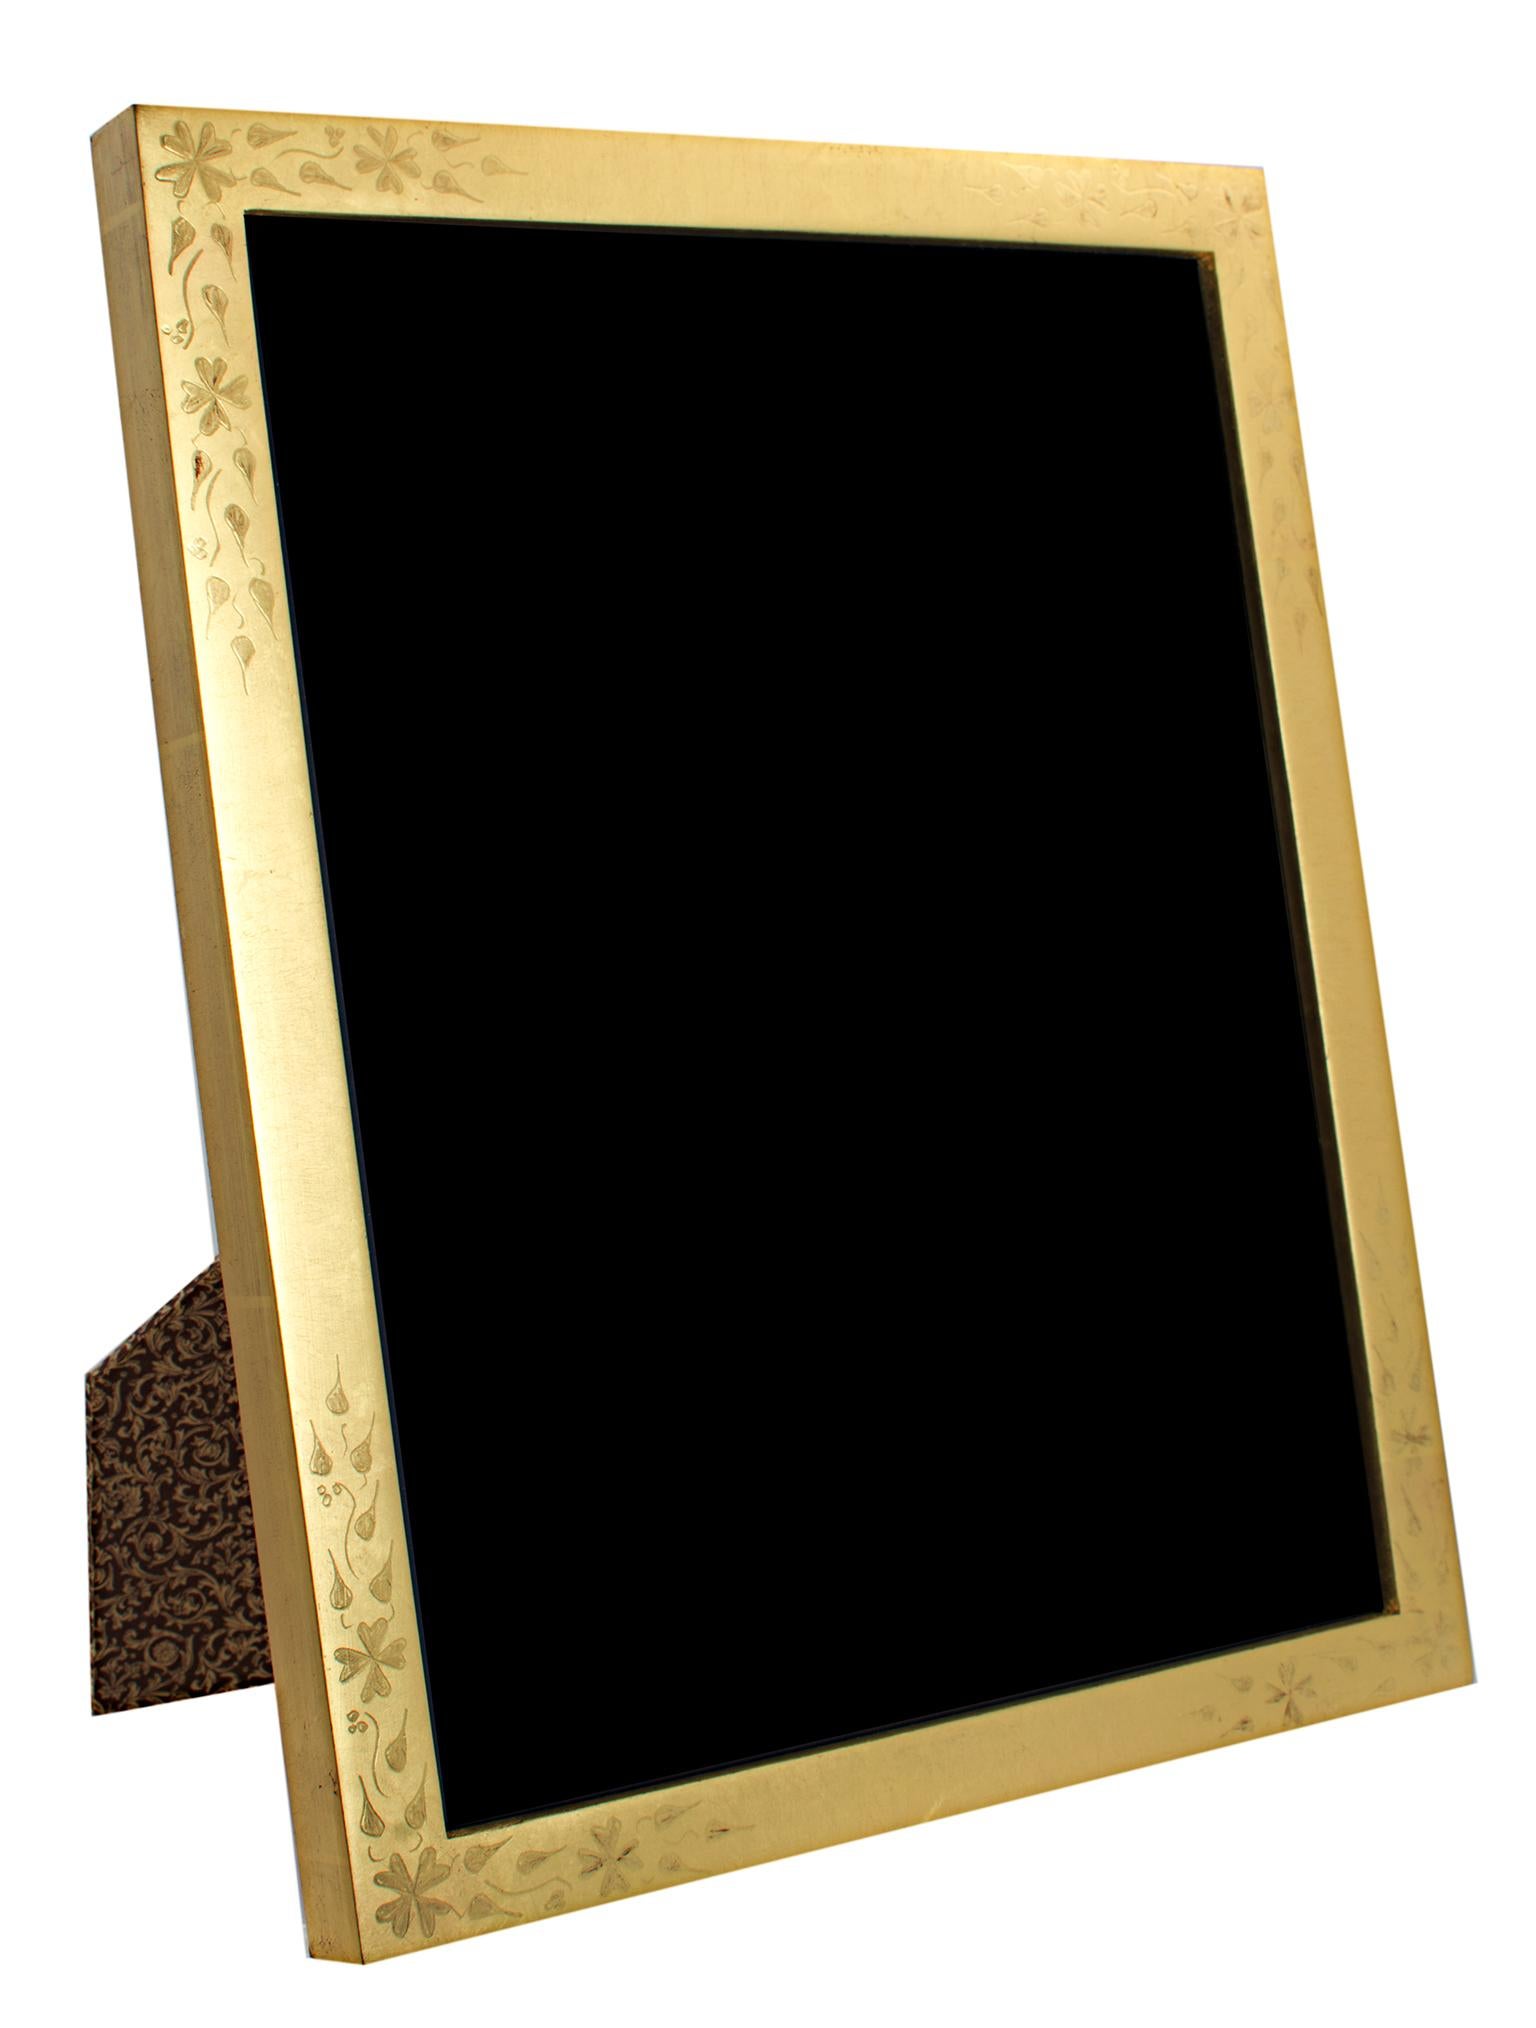 "Handmade 22K Gold Leaf Photo Frame, " Wood 8 x 10 in created by Romania - Art by Unknown